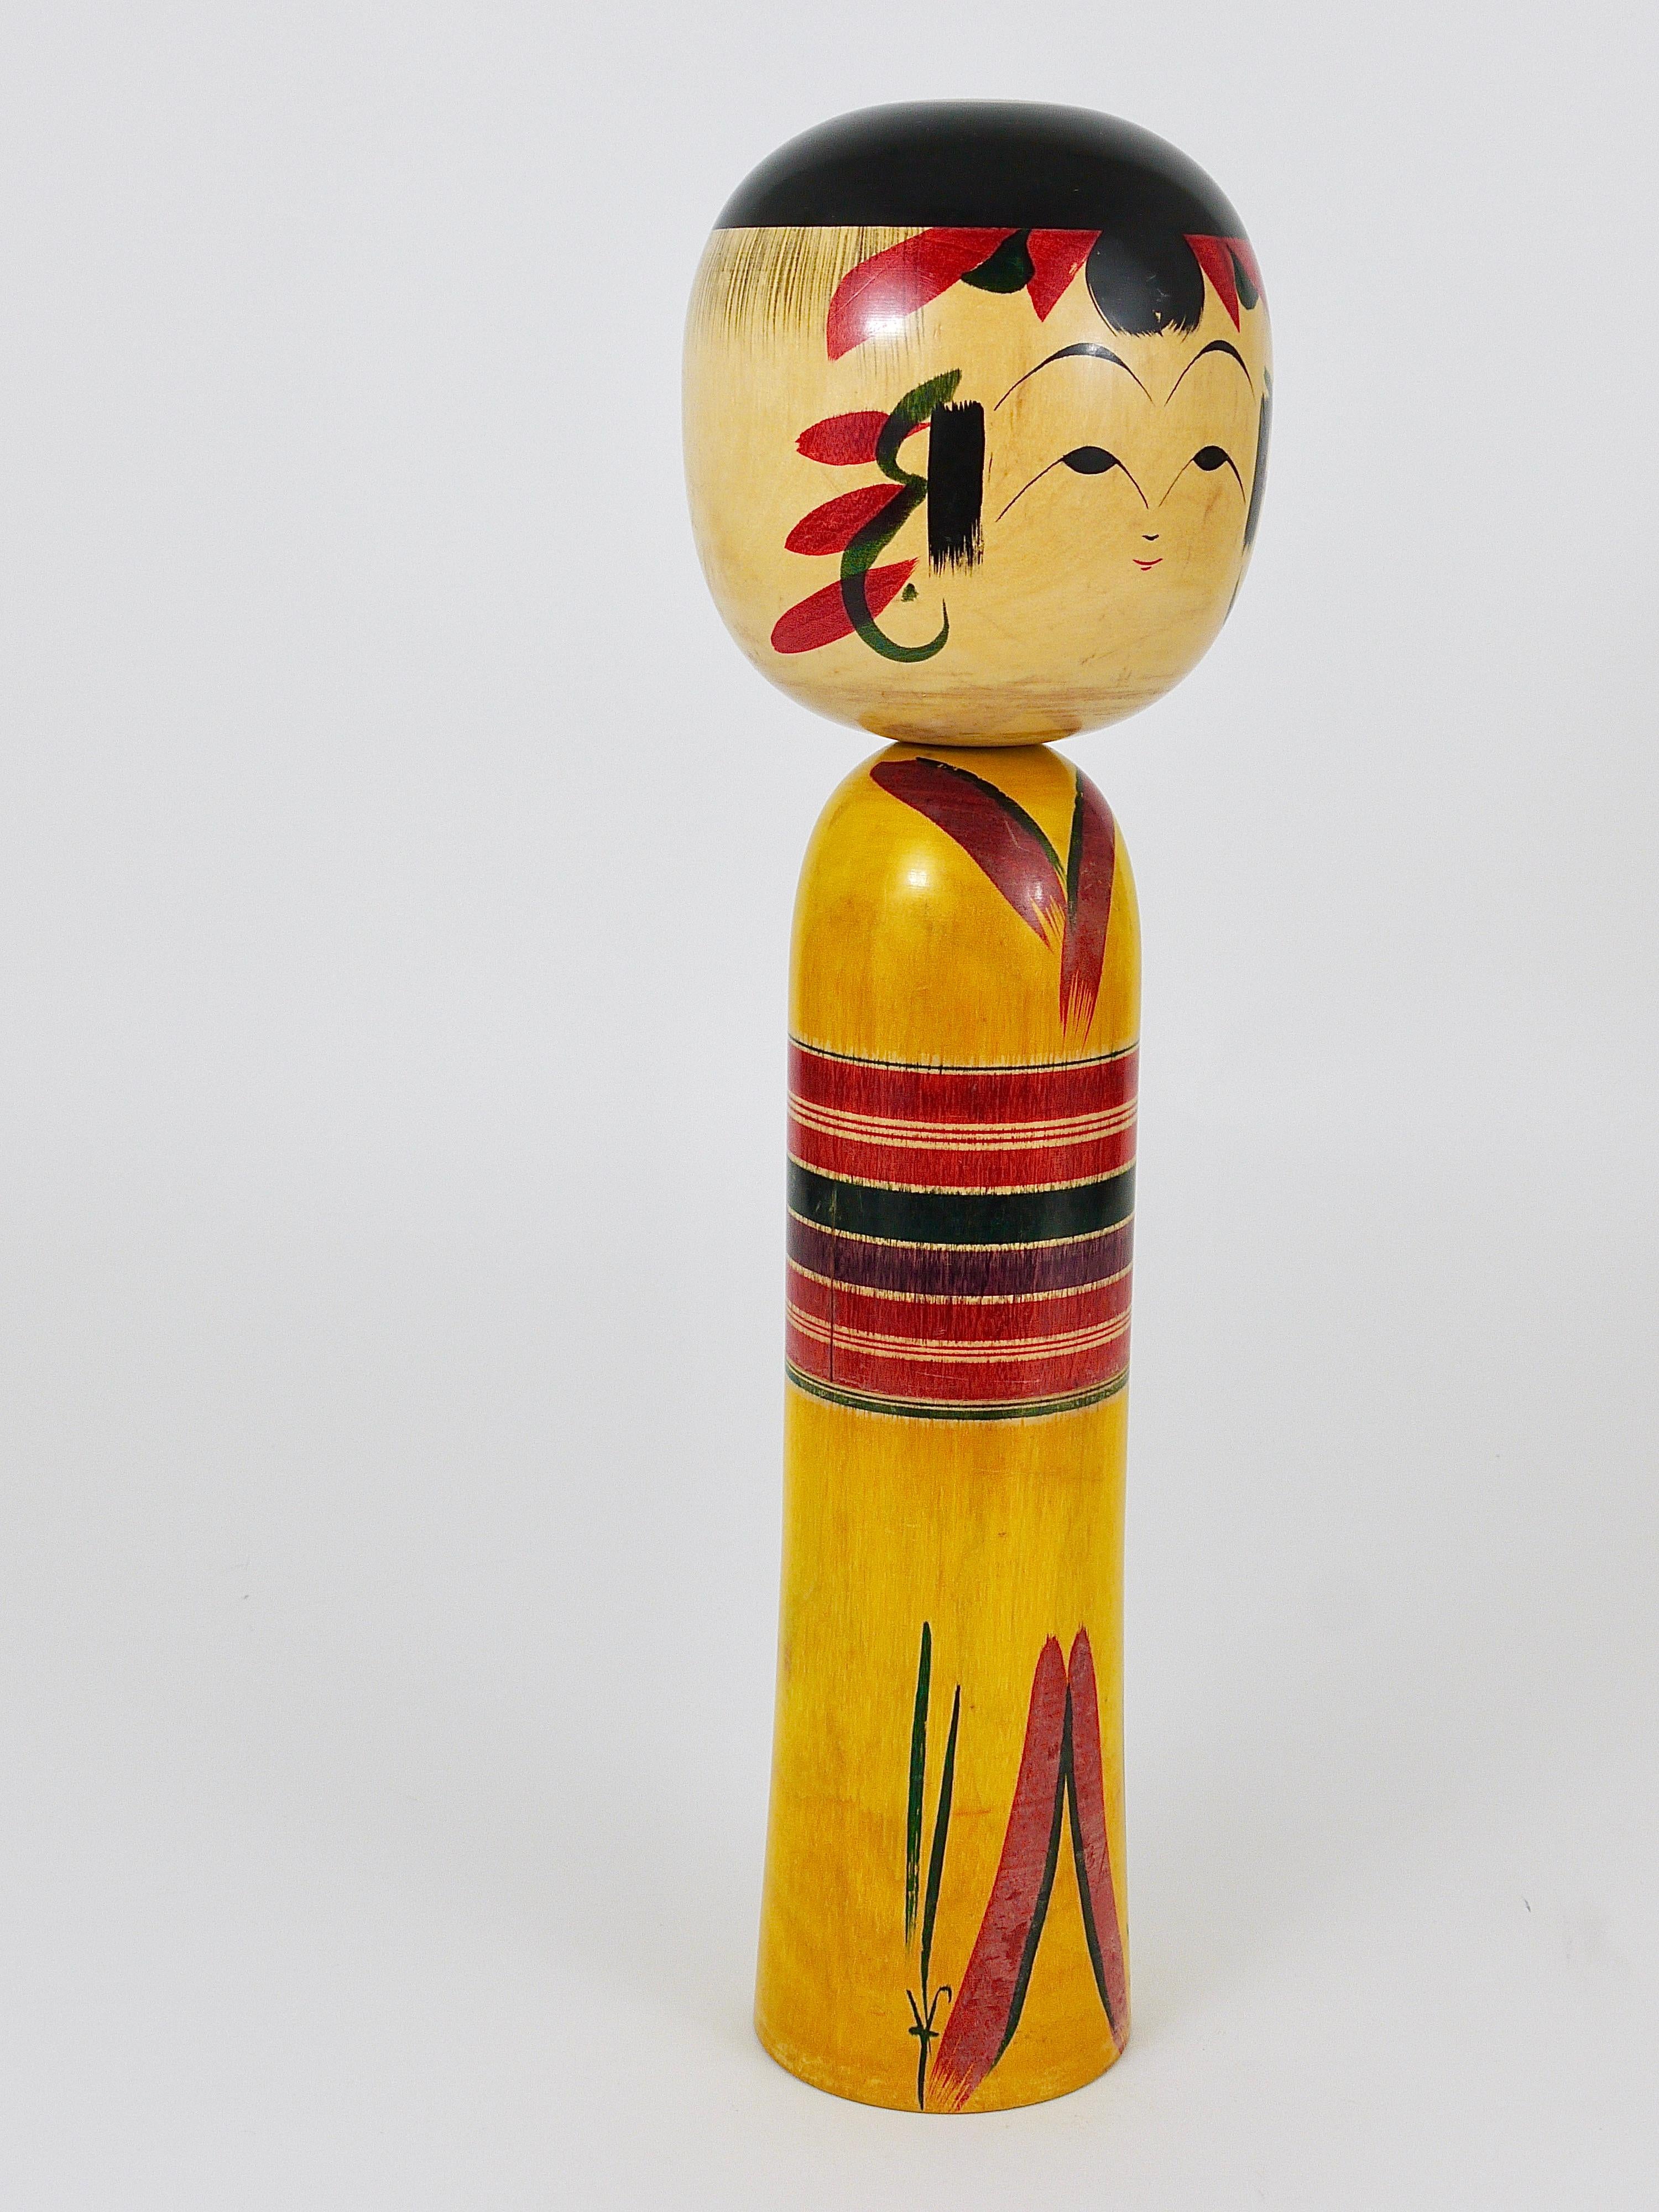 Decorative Kokeshi Doll Sculpture from Northern Japan, Hand-Painted, Signed 5